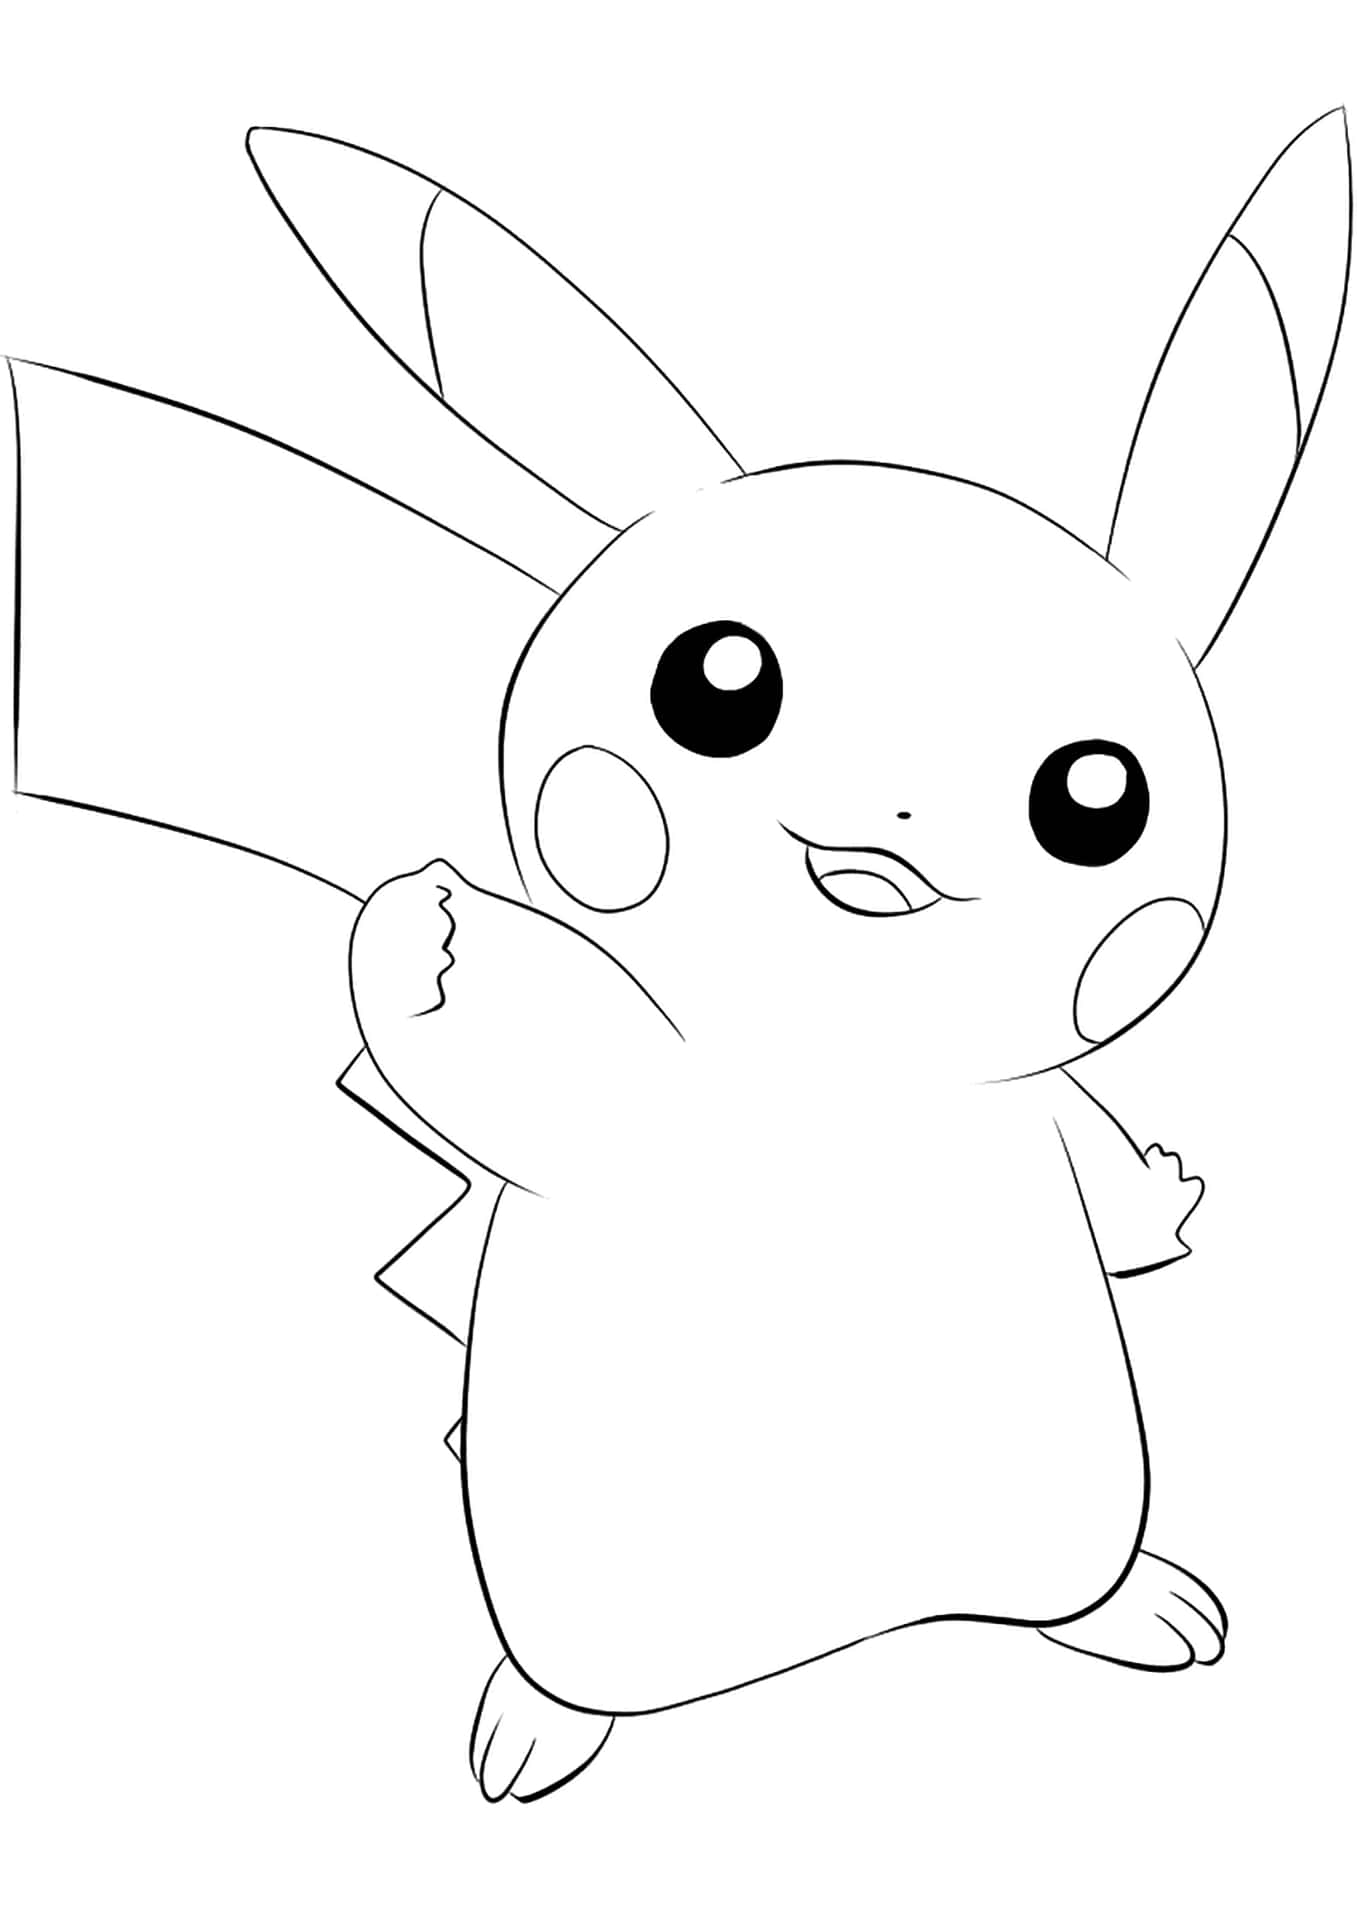 Download get creative and bring your favorite pokemon to life with this printable pokemon coloring page